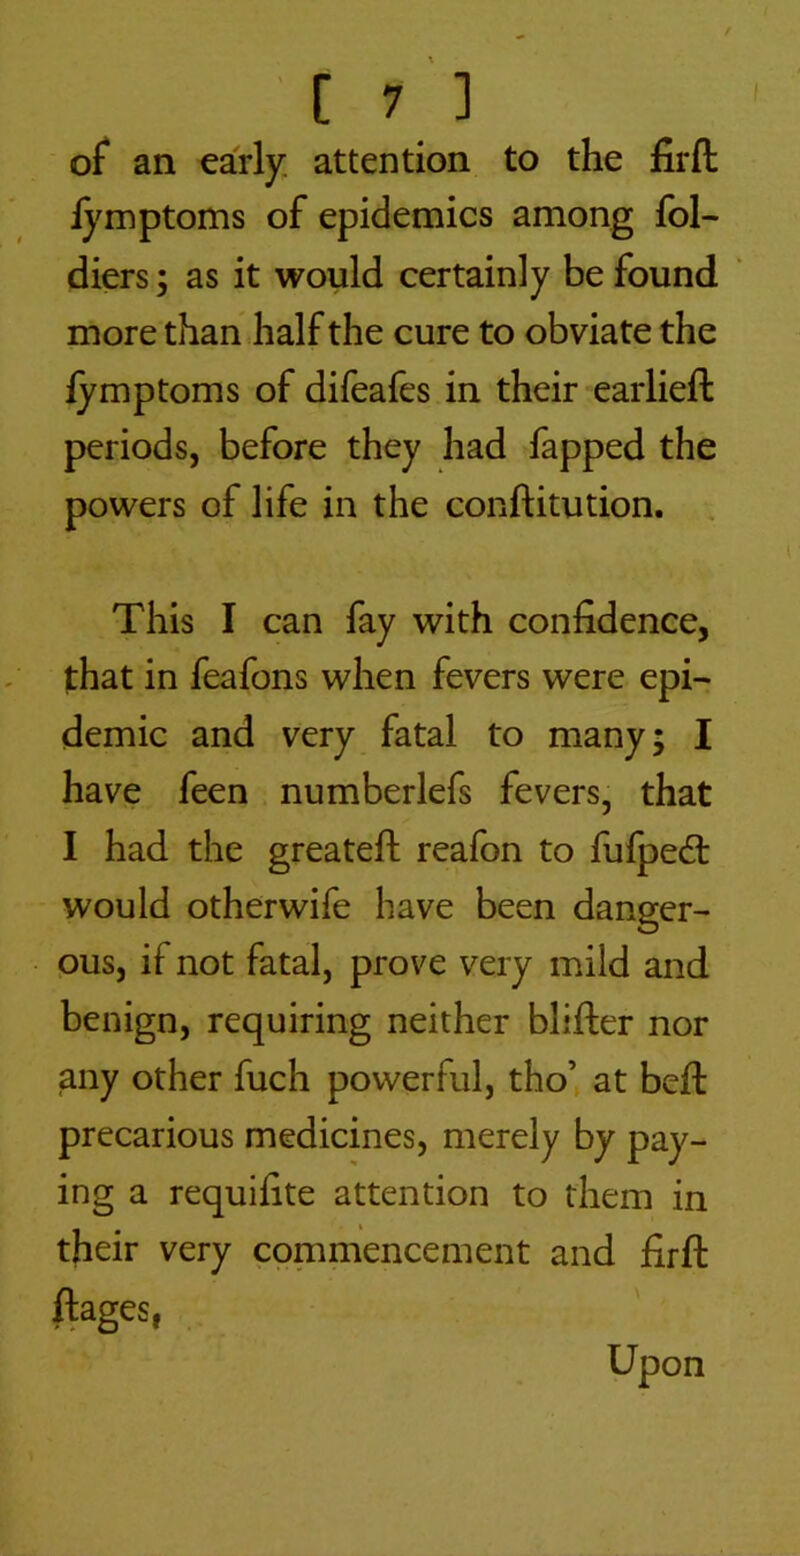 [7 ] of an early; attention to the fir ft iymptoms of epidemics among fol- diers; as it would certainly be found * more than half the cure to obviate the fymptoms of difeafes in their earlieft periods, before they had fapped the powers of life in the conftitution. This I can fay with confidence, that in feafons when fevers were epi- demic and very fatal to many; I have feen numberlefs fevers, that I had the greateft reafon to fulpedt would otherwife have been danger- ous, if not fatal, prove very mild and benign, requiring neither blifter nor any other fuch powerful, tho’ at beft precarious medicines, merely by pay- ing a requifite attention to them in their very commencement and firft ftages, Upon